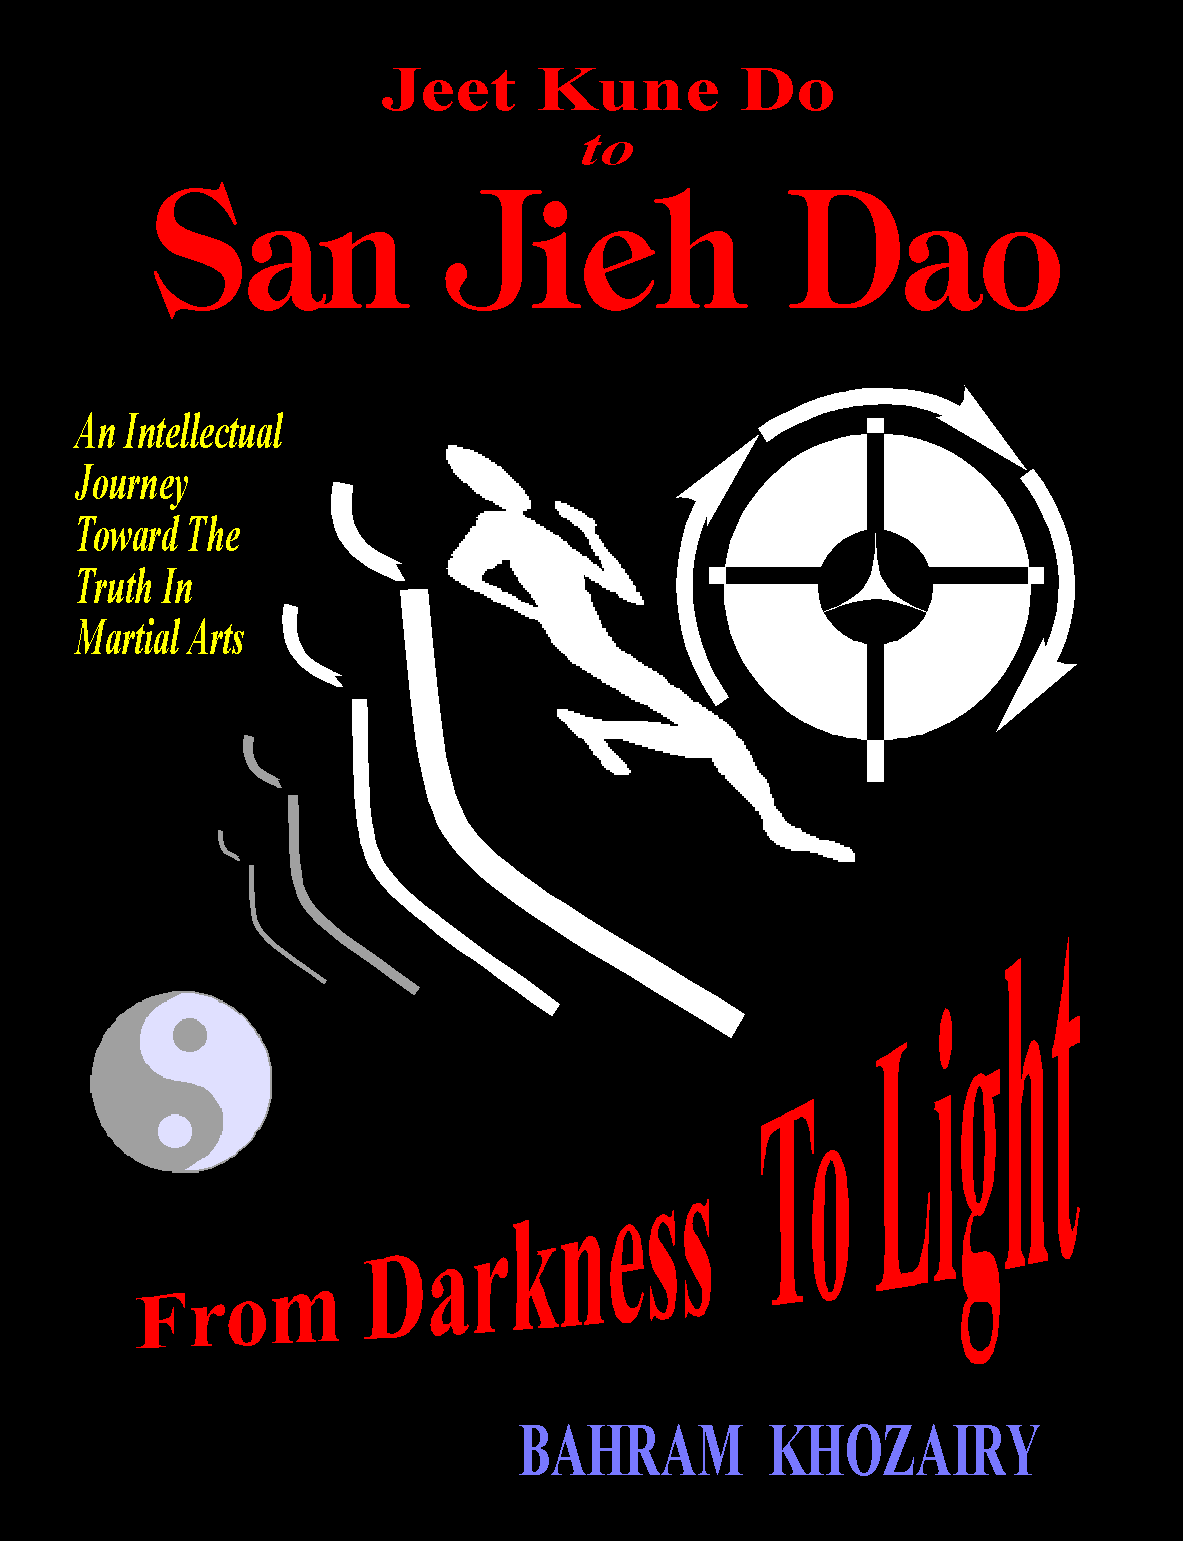 Jeet Kune Do, 
From Darkness To Light